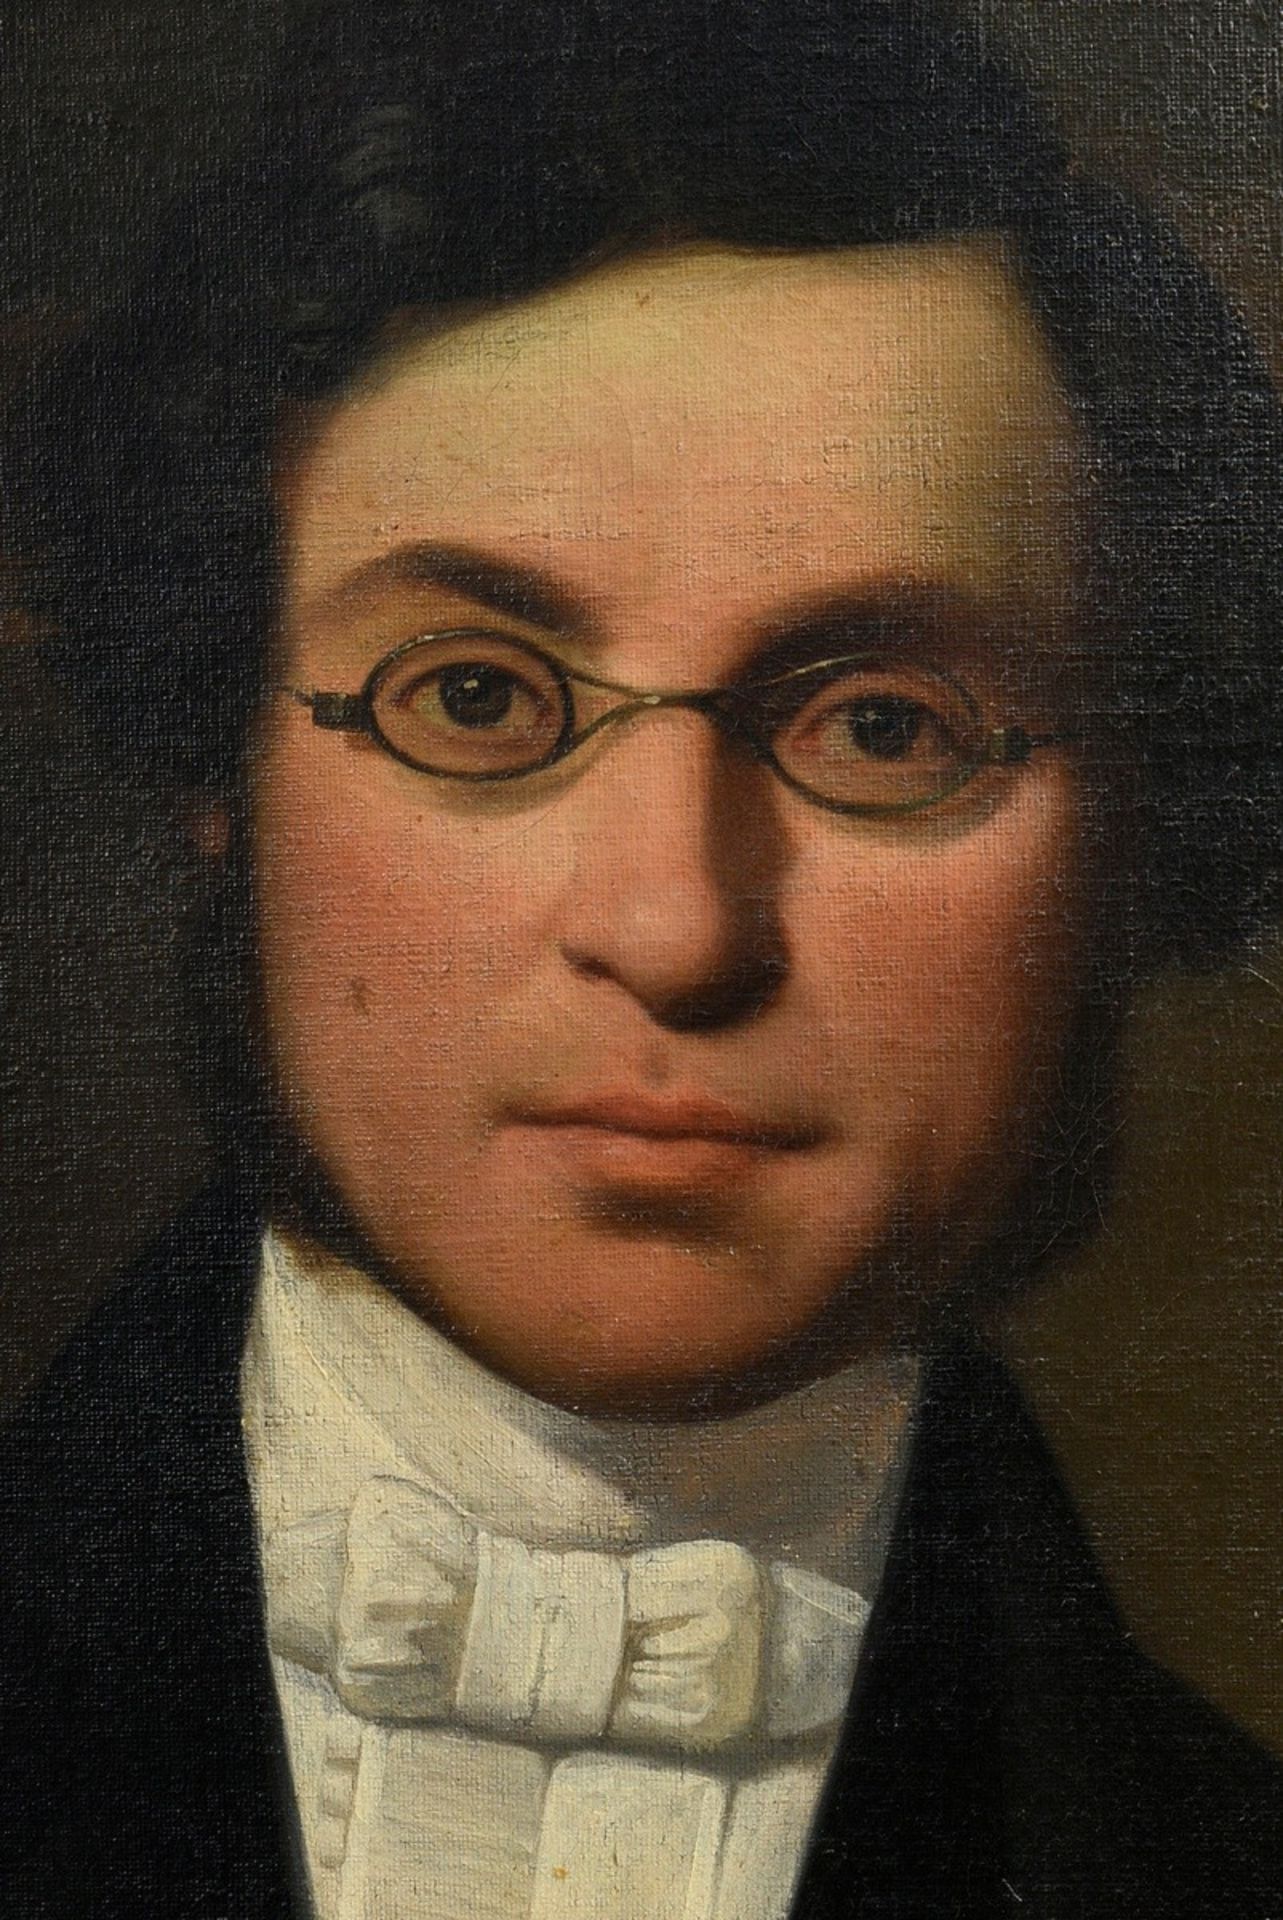 Glaize, Auguste Barthélémy (1807-1893) "Full-length Portrait of a Young Man with Glasses" 1842, oil - Image 3 of 13